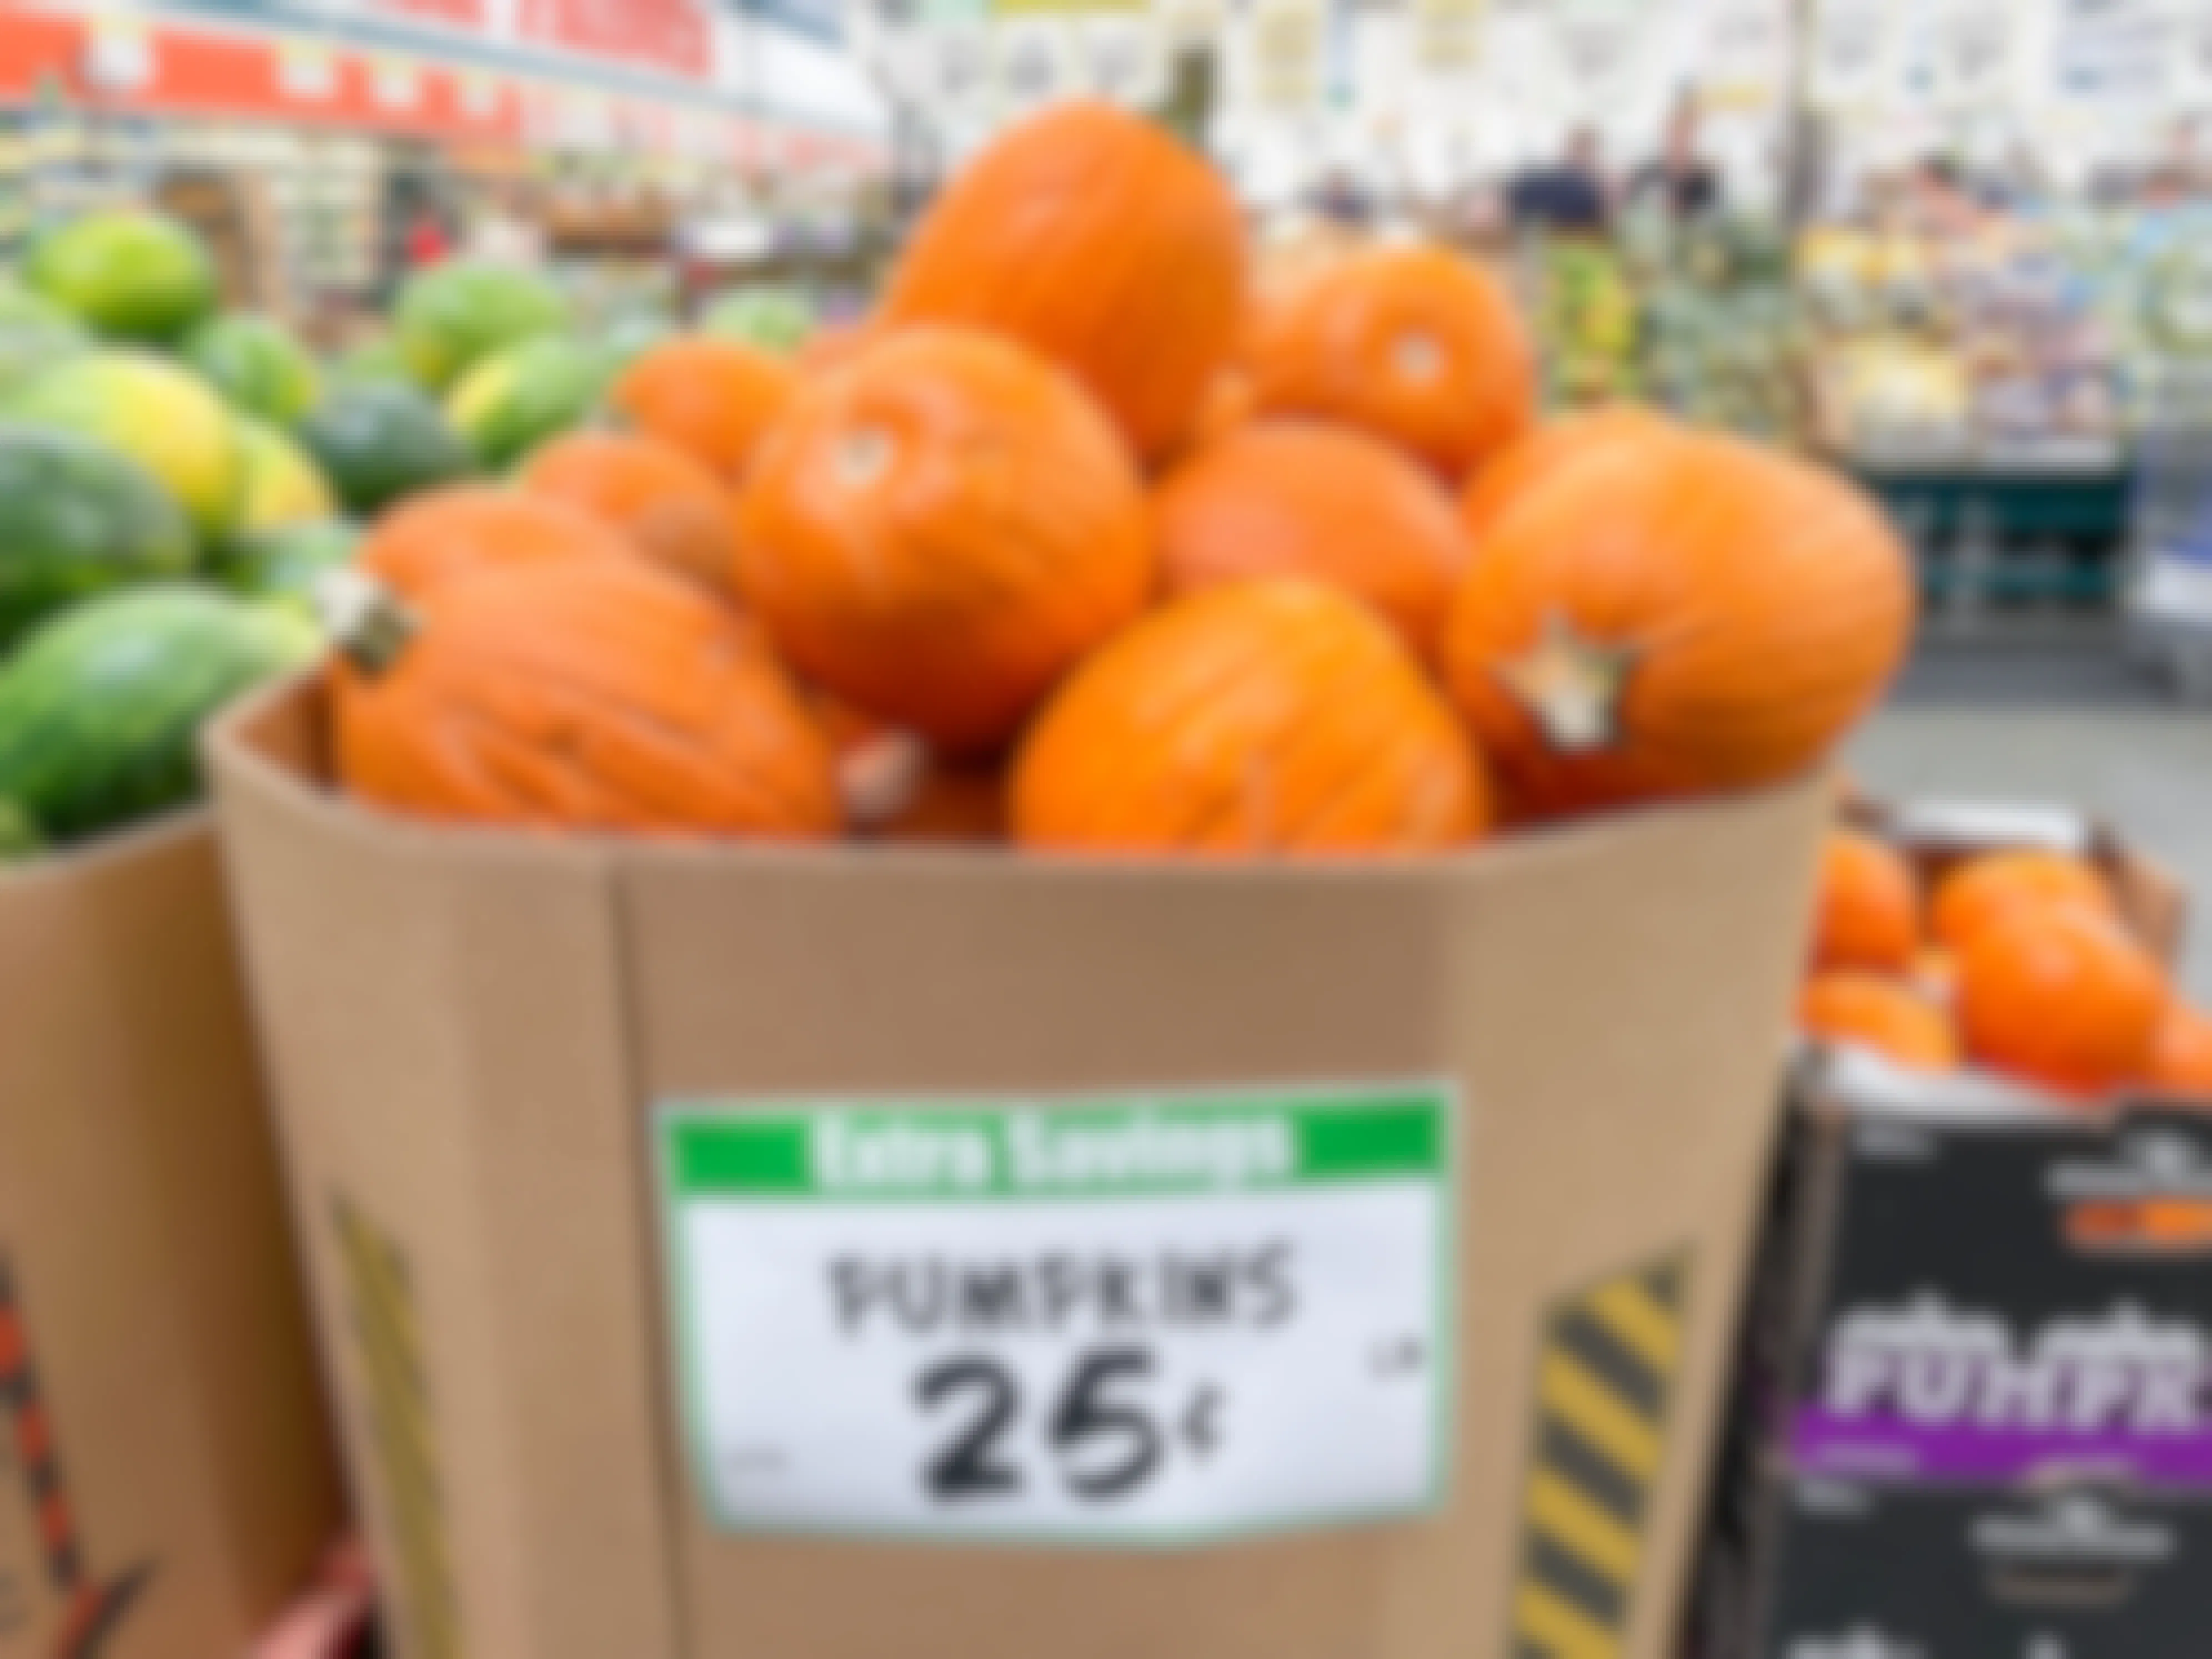 A large box filled with pumpkins in the produce section at WinCo Foods with a price sign for 25 cents a pound..